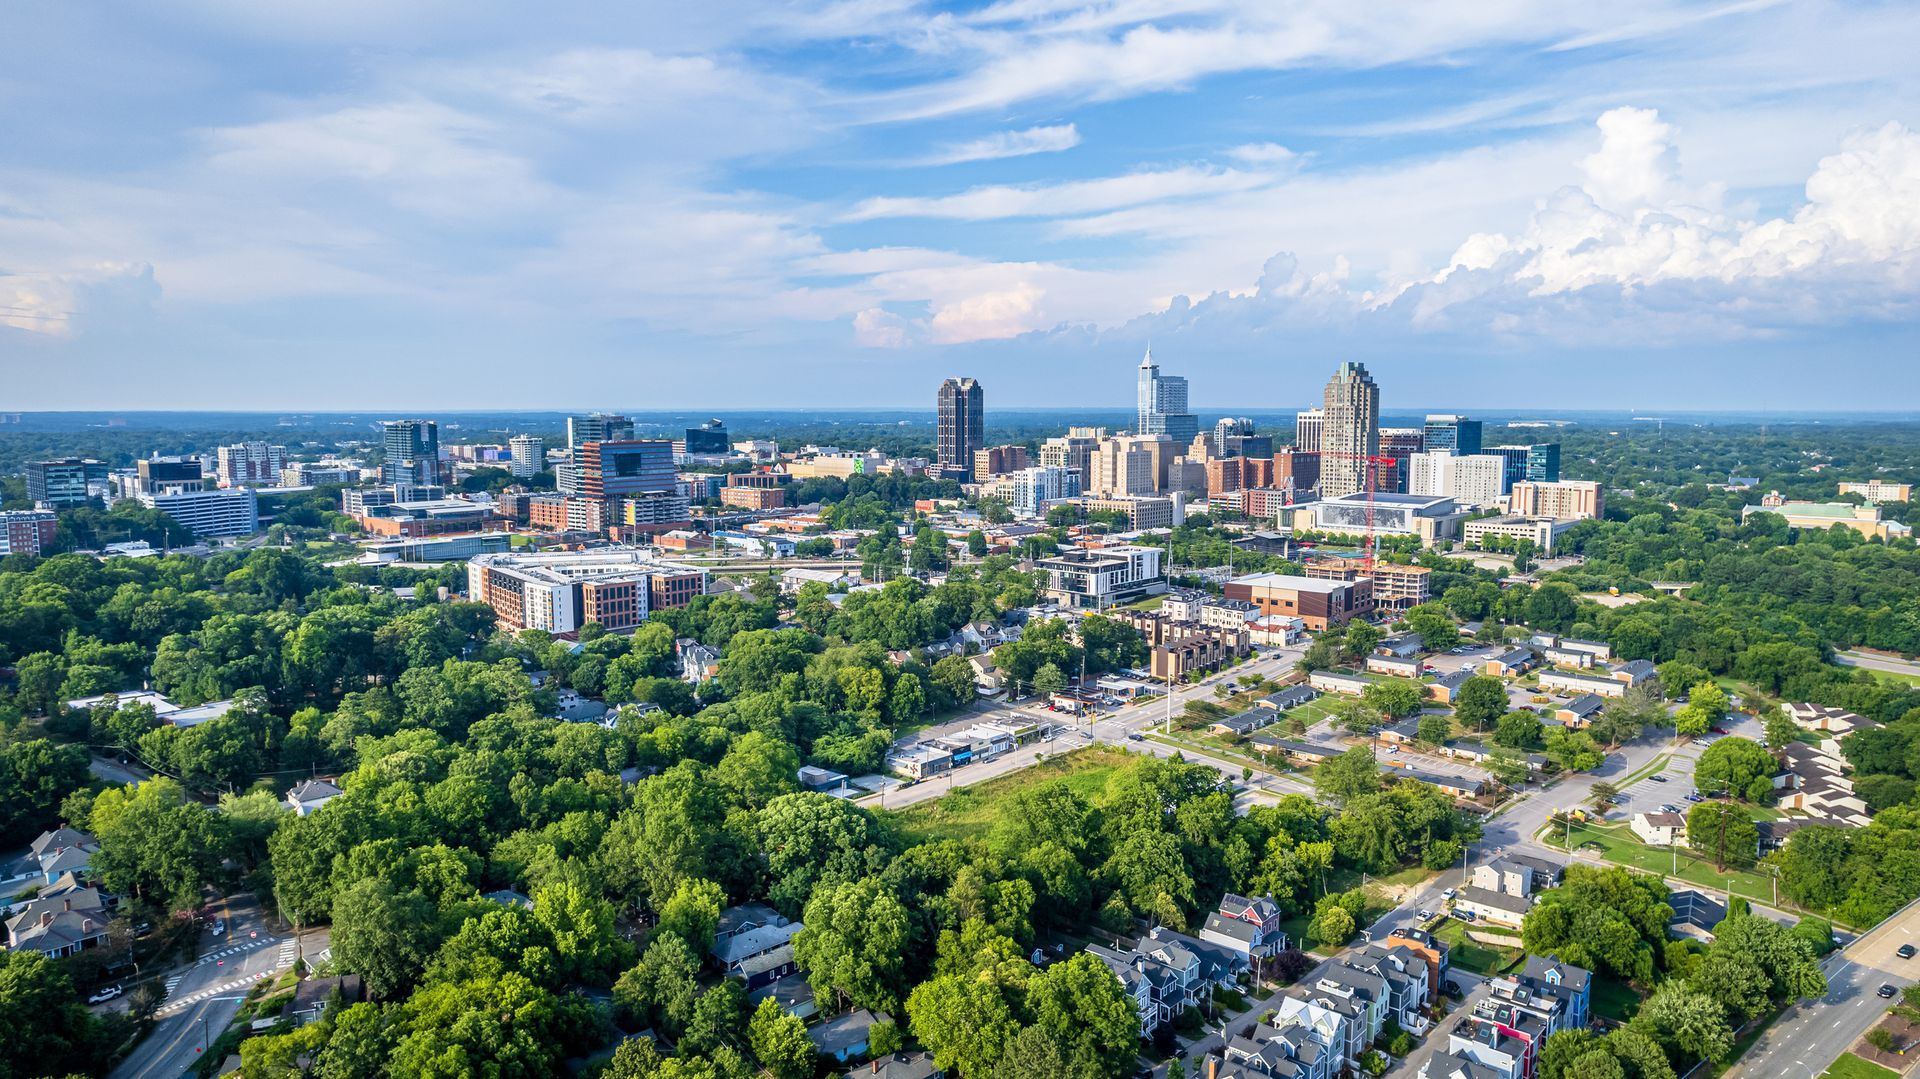 An Aerial View Of A City With Lots of Trees And Buildings - Clemmons, NC - Jetco Septic Service